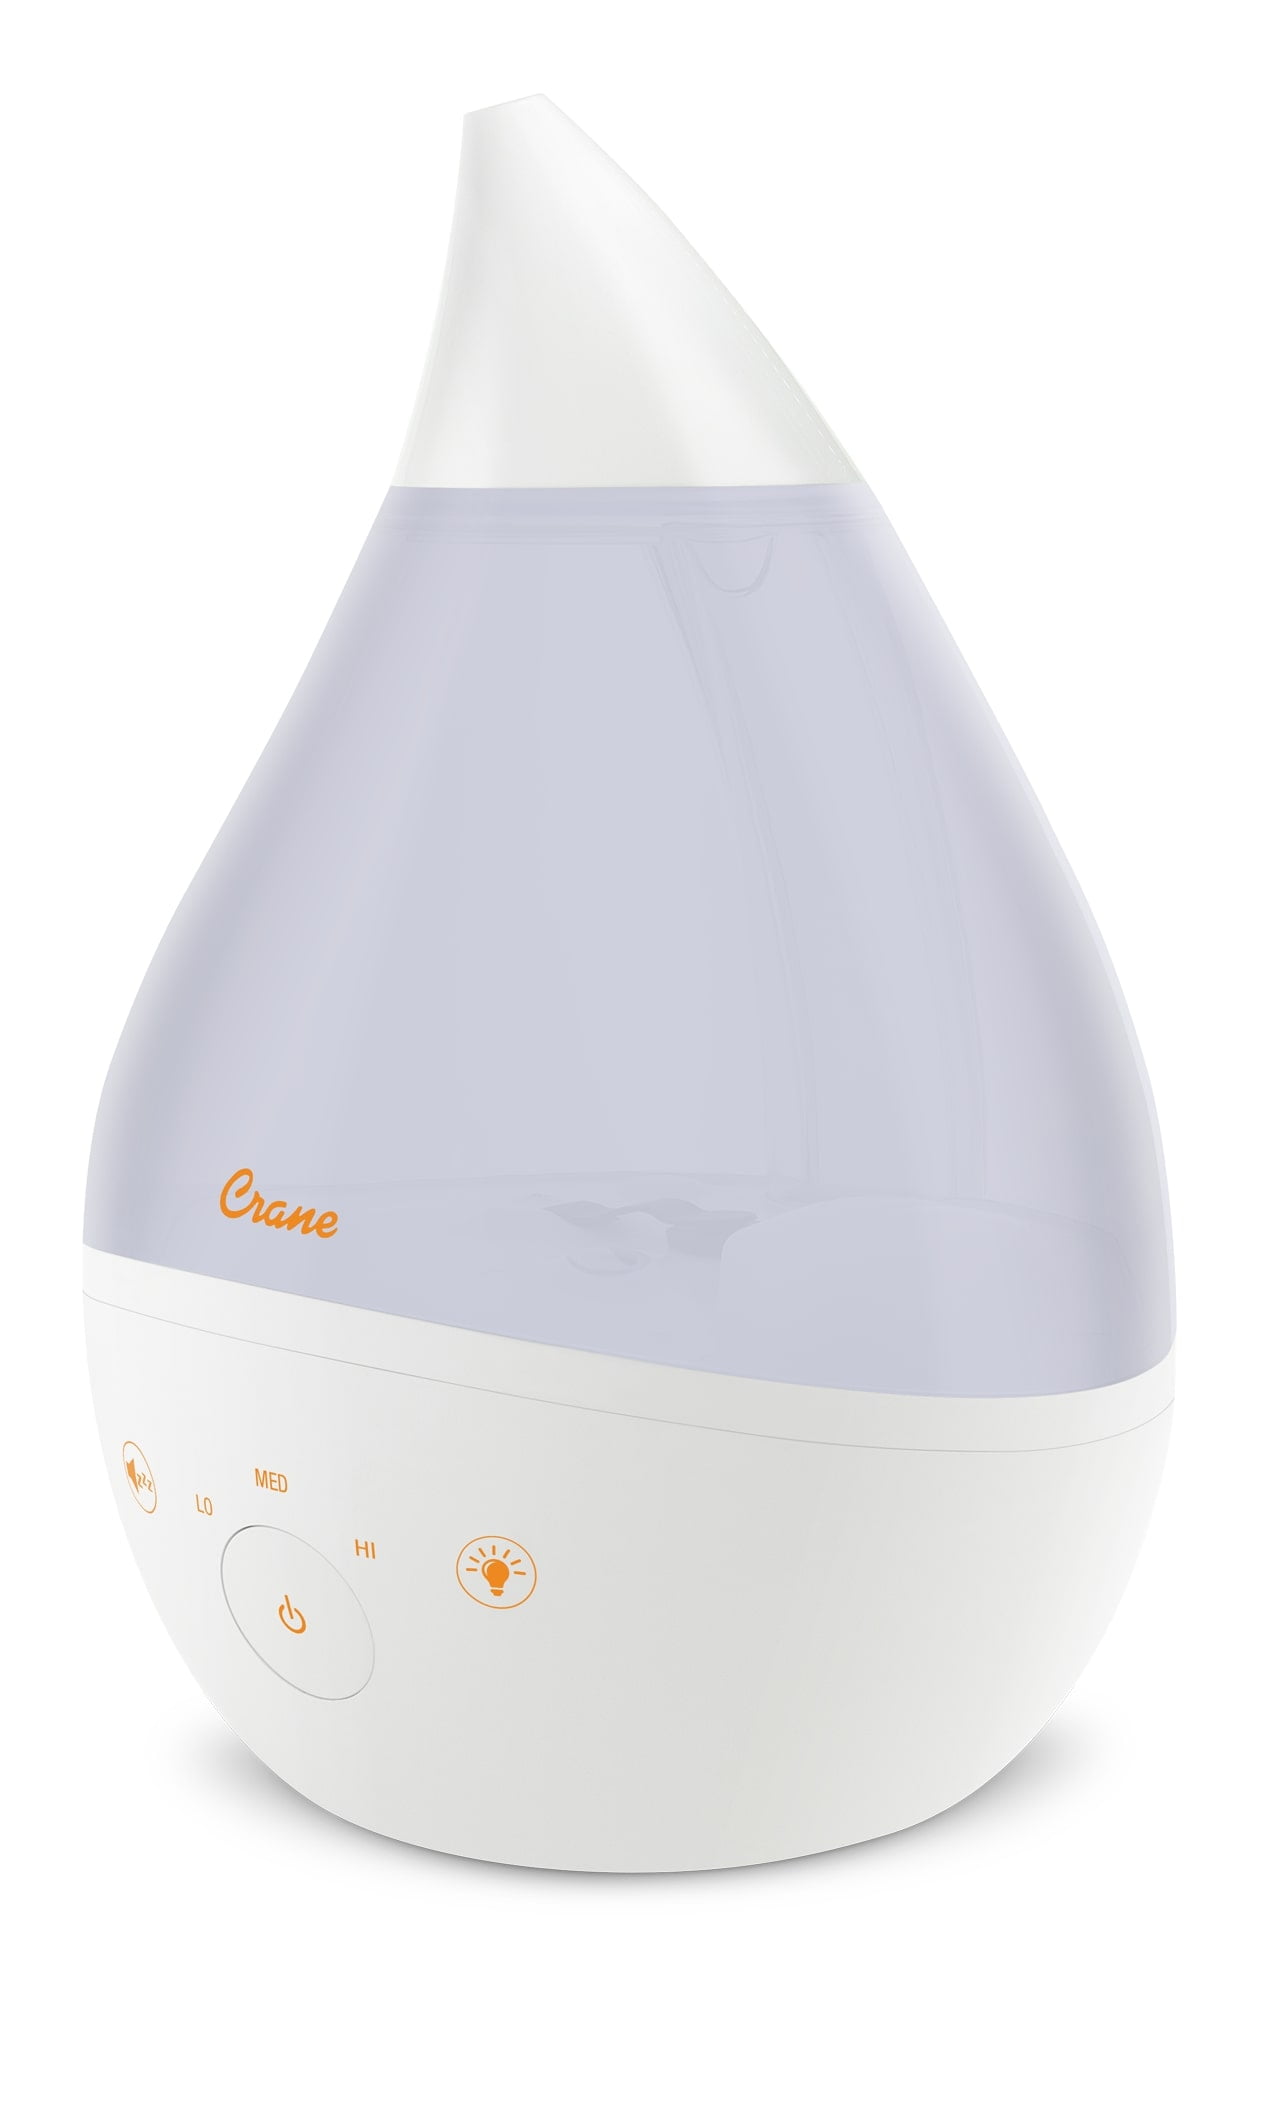 Anti Gravity Humidifier 800ML Air Water Droplets Ultrasonic Cool Mist Maker  ( white ) at Rs 1000, Ultrasonic Air Humidifier in Faridabad